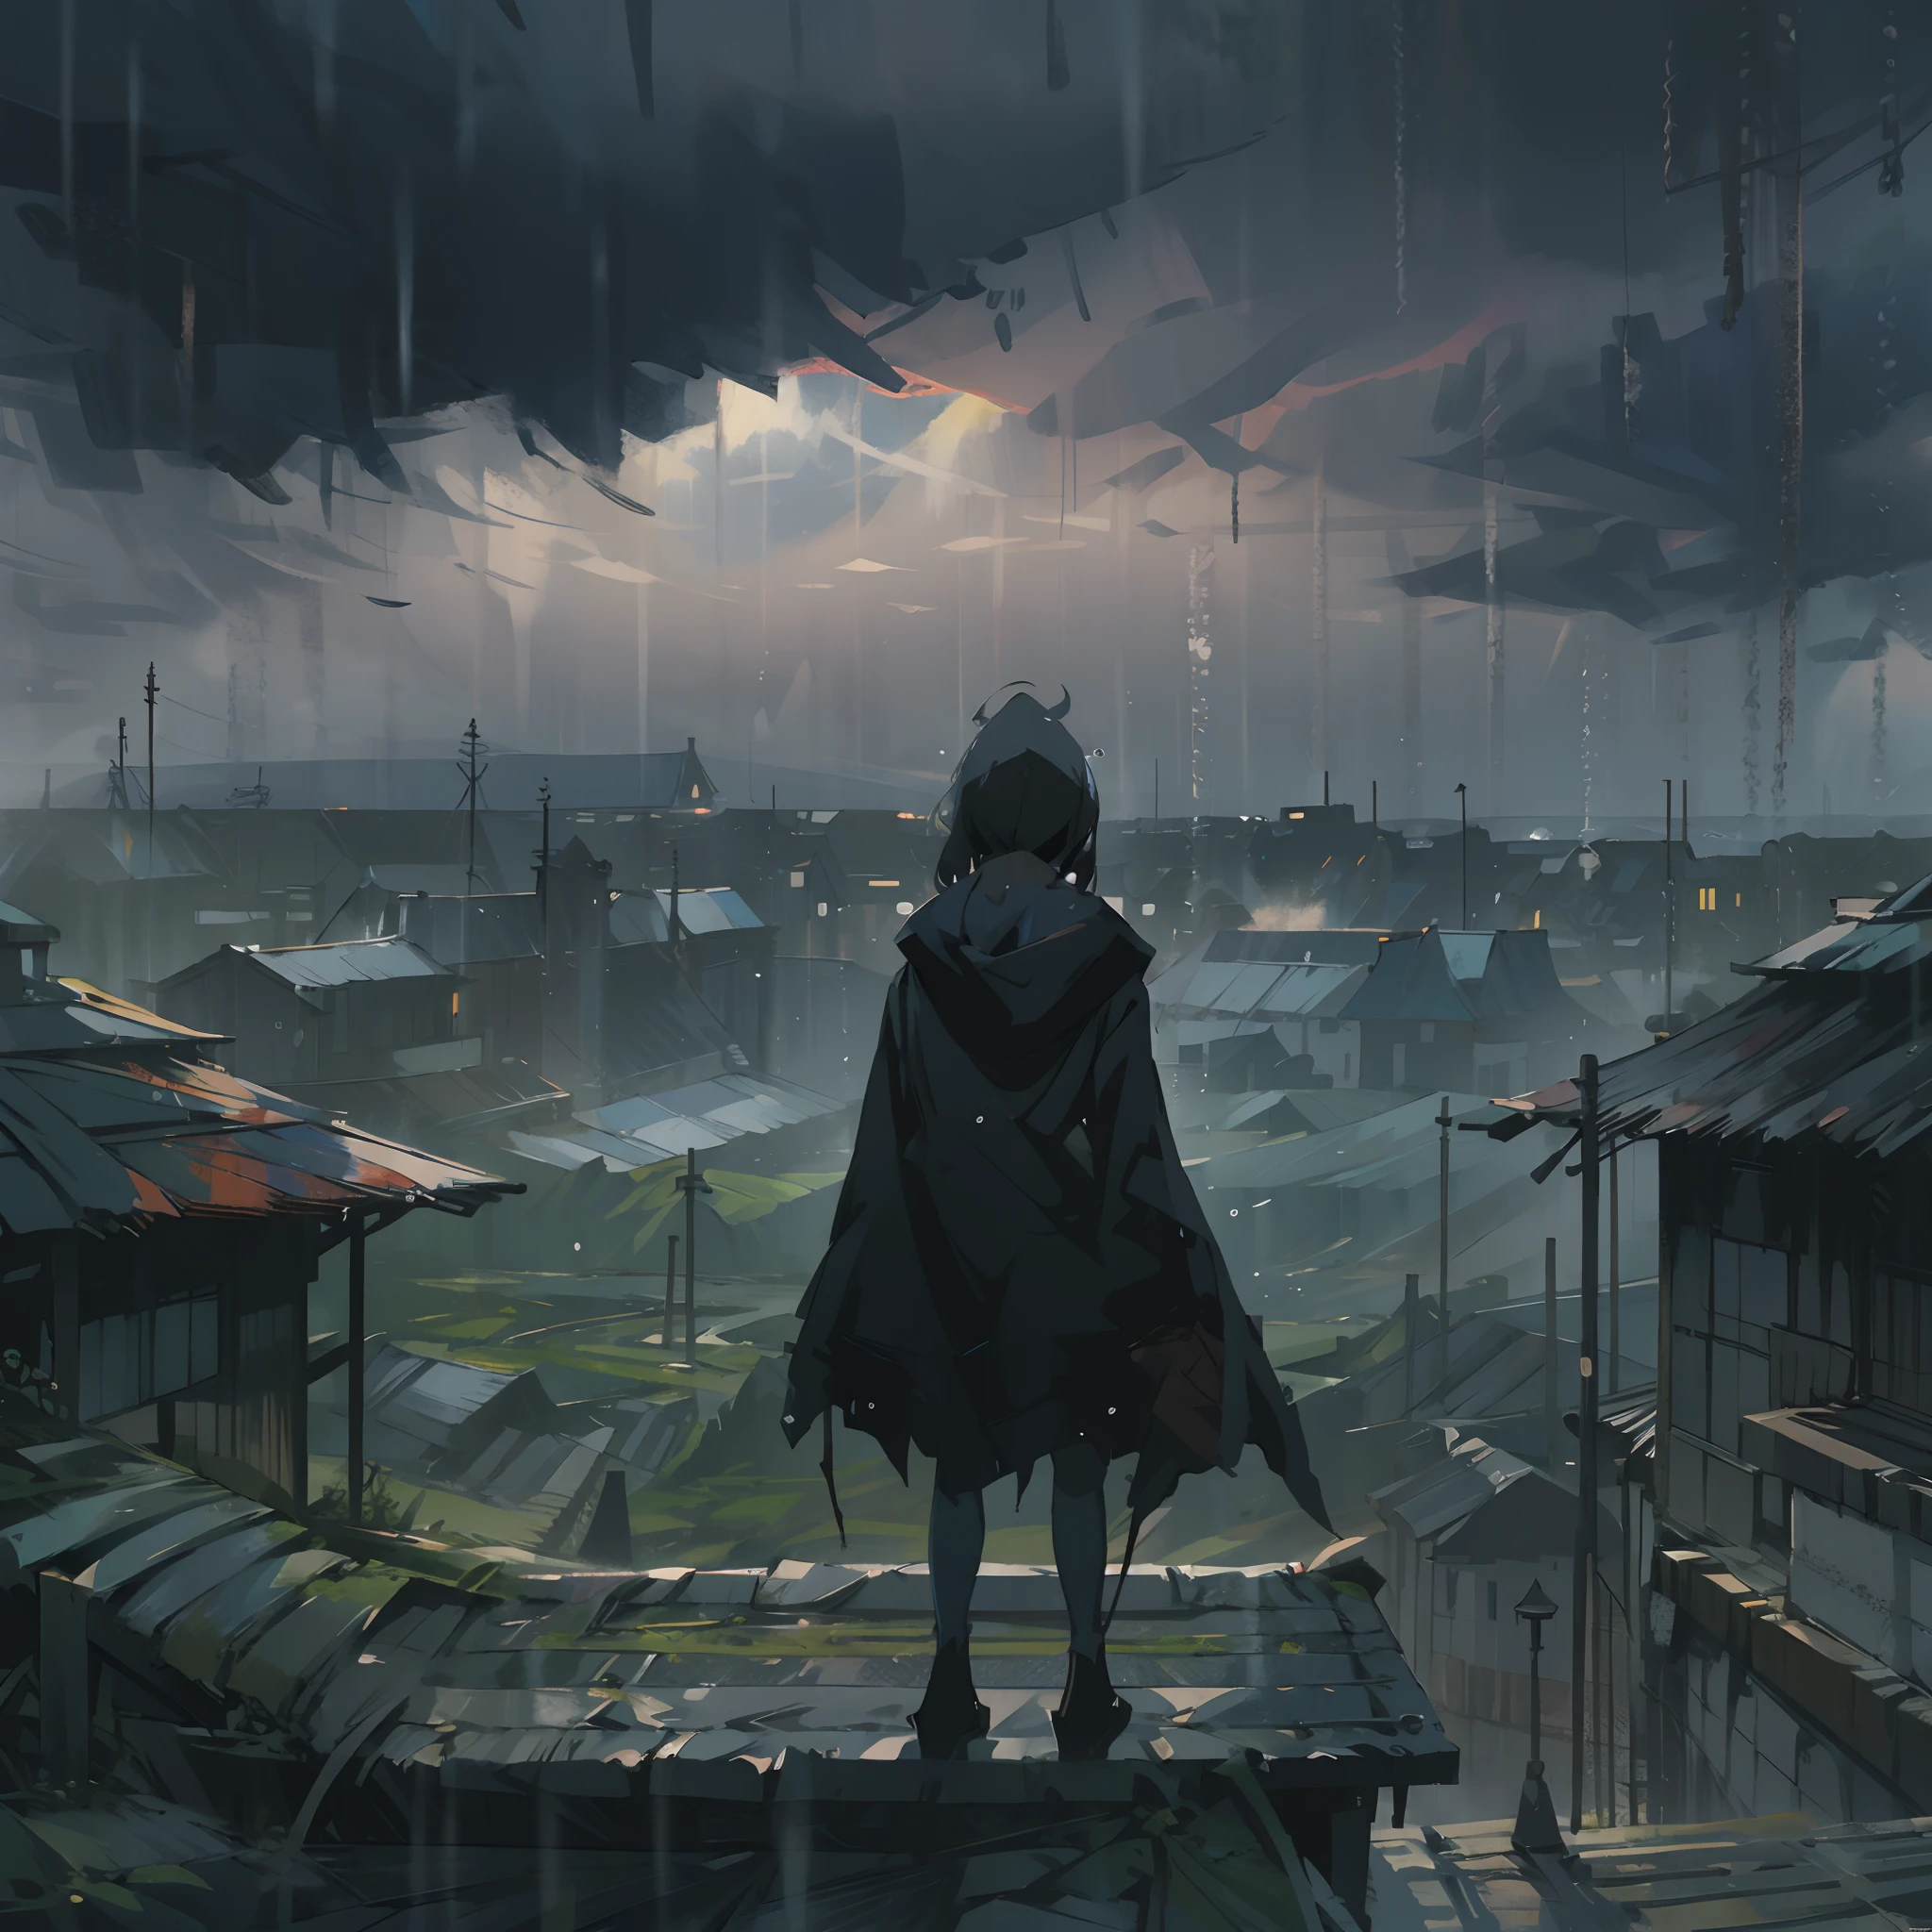 Anime artstyle, wearing a black hood, standing on top ofa roof,back facing the viewer, raining,cloudy,dark clouds, gritty,fog,misty village